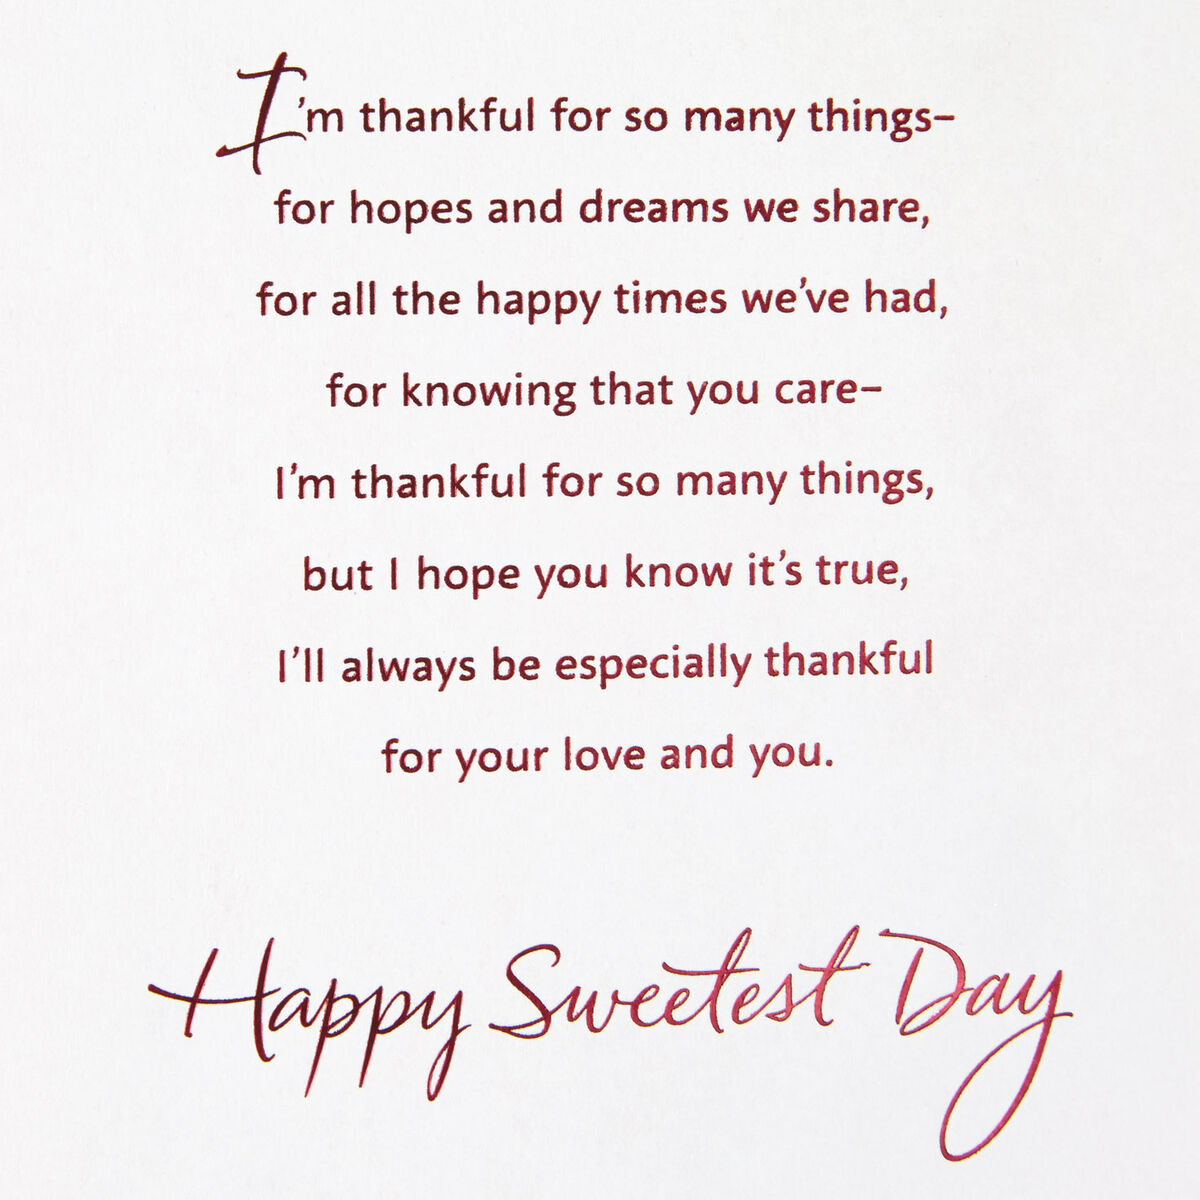 how-much-i-love-you-sweetest-day-card-greeting-cards-hallmark